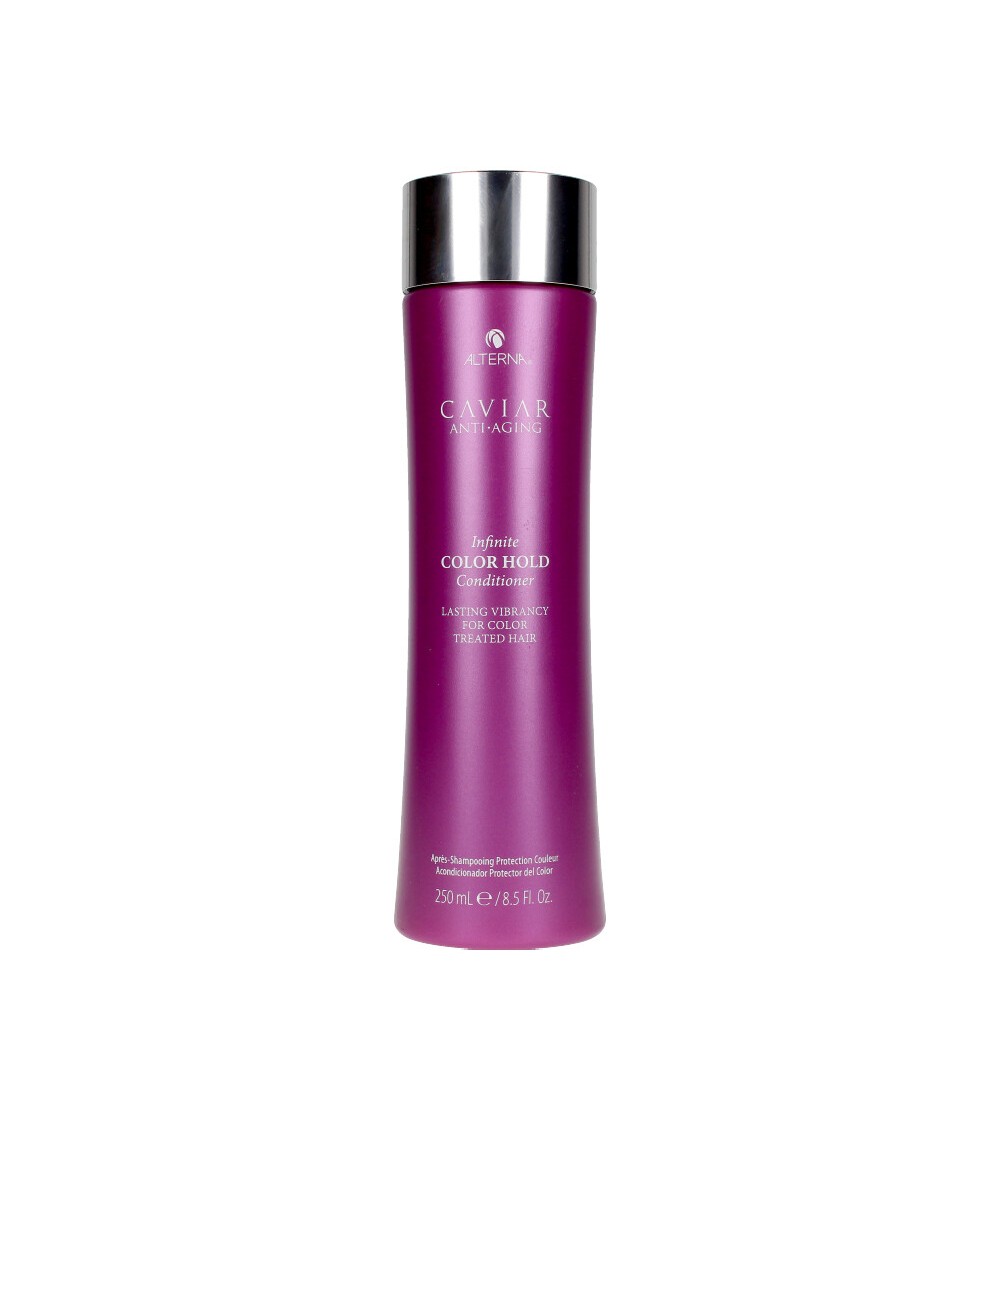 CAVIAR INFINITE COLOR HOLD après-shampooing protection couleur 250 ml